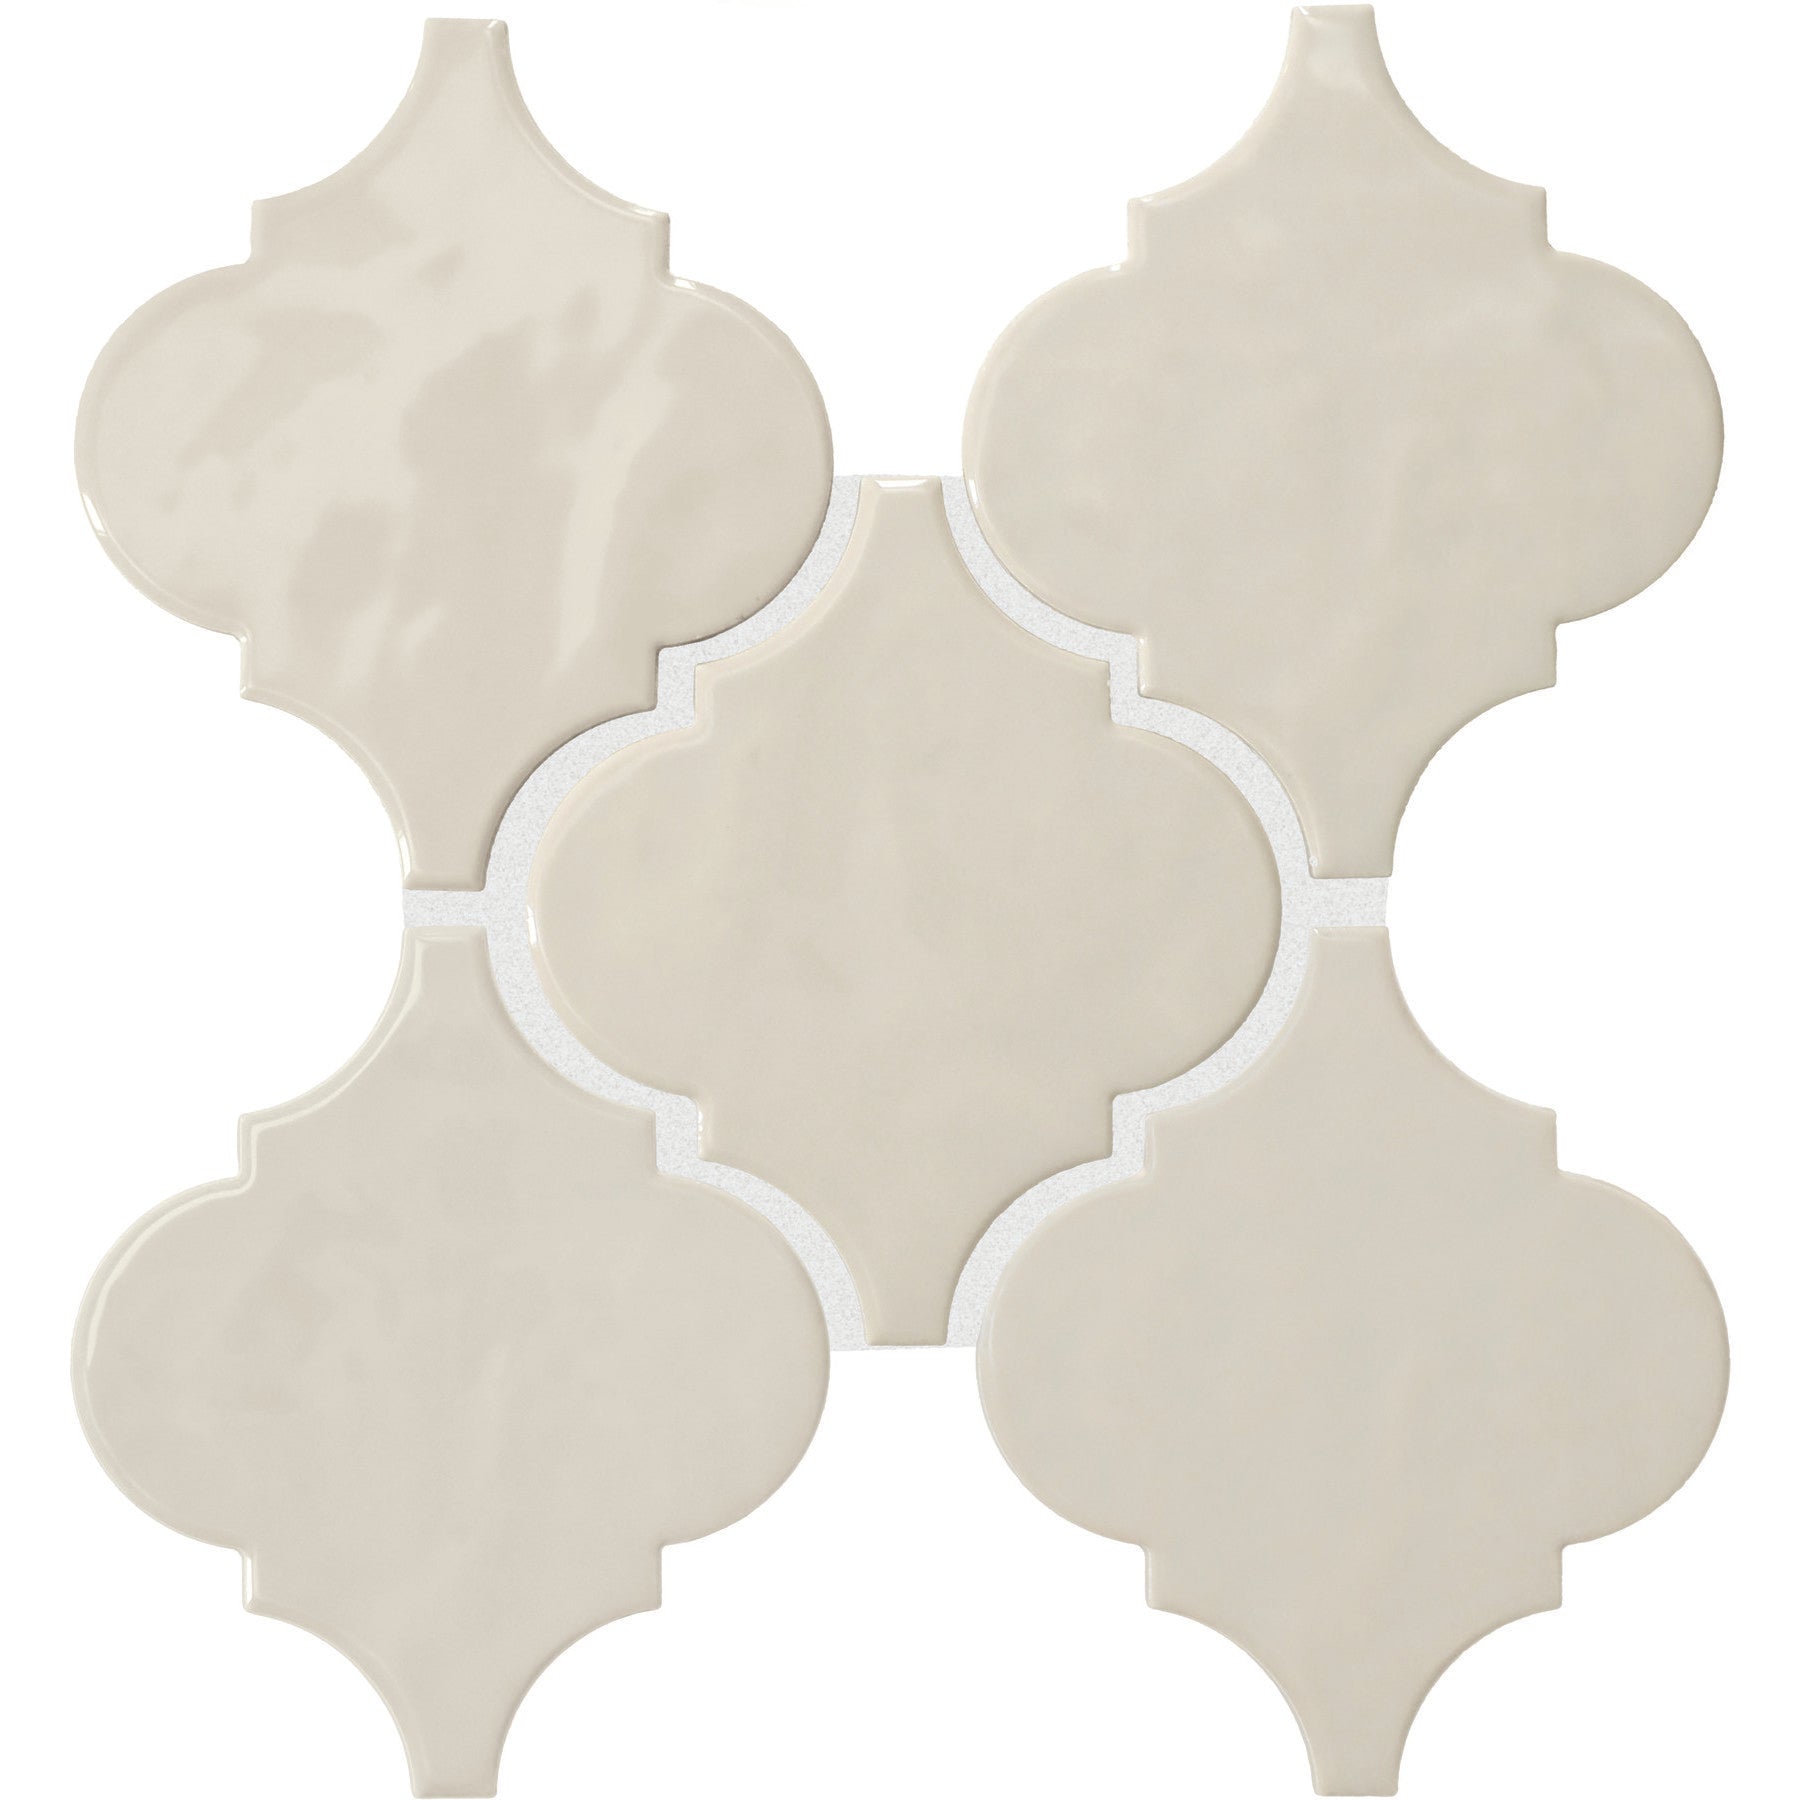 American Olean - Playscapes Arabesque Wall Tile - Linen PS72